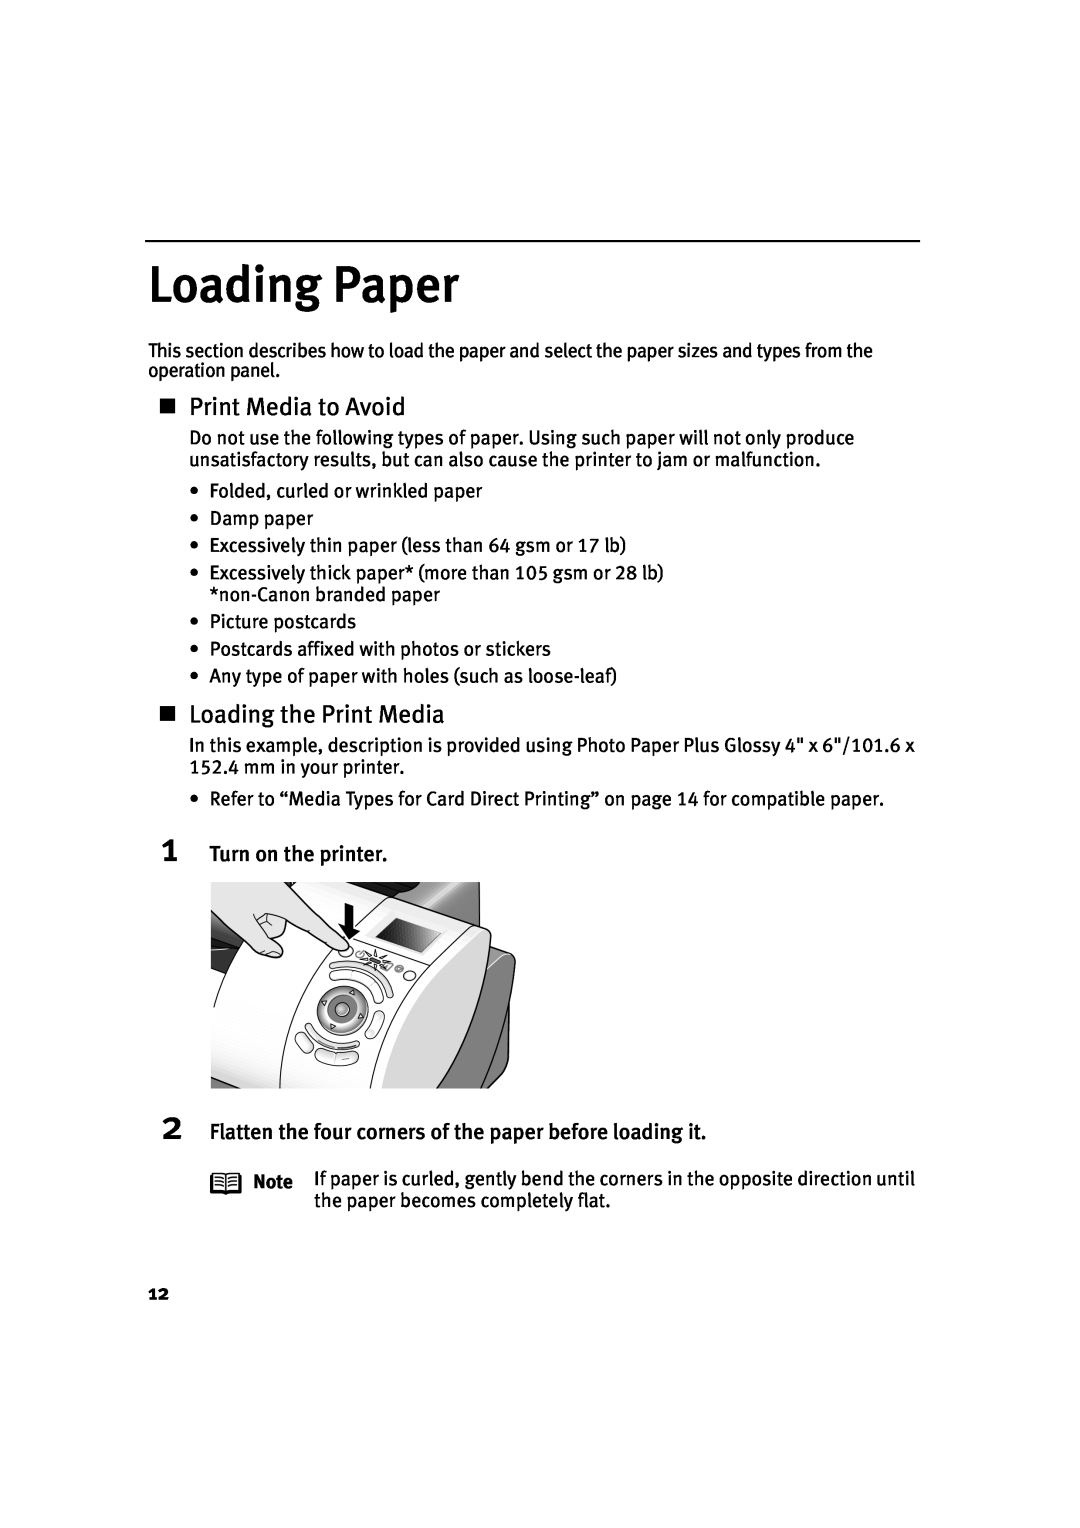 Canon 900D manual Loading Paper, „ Print Media to Avoid, „ Loading the Print Media, Turn on the printer 